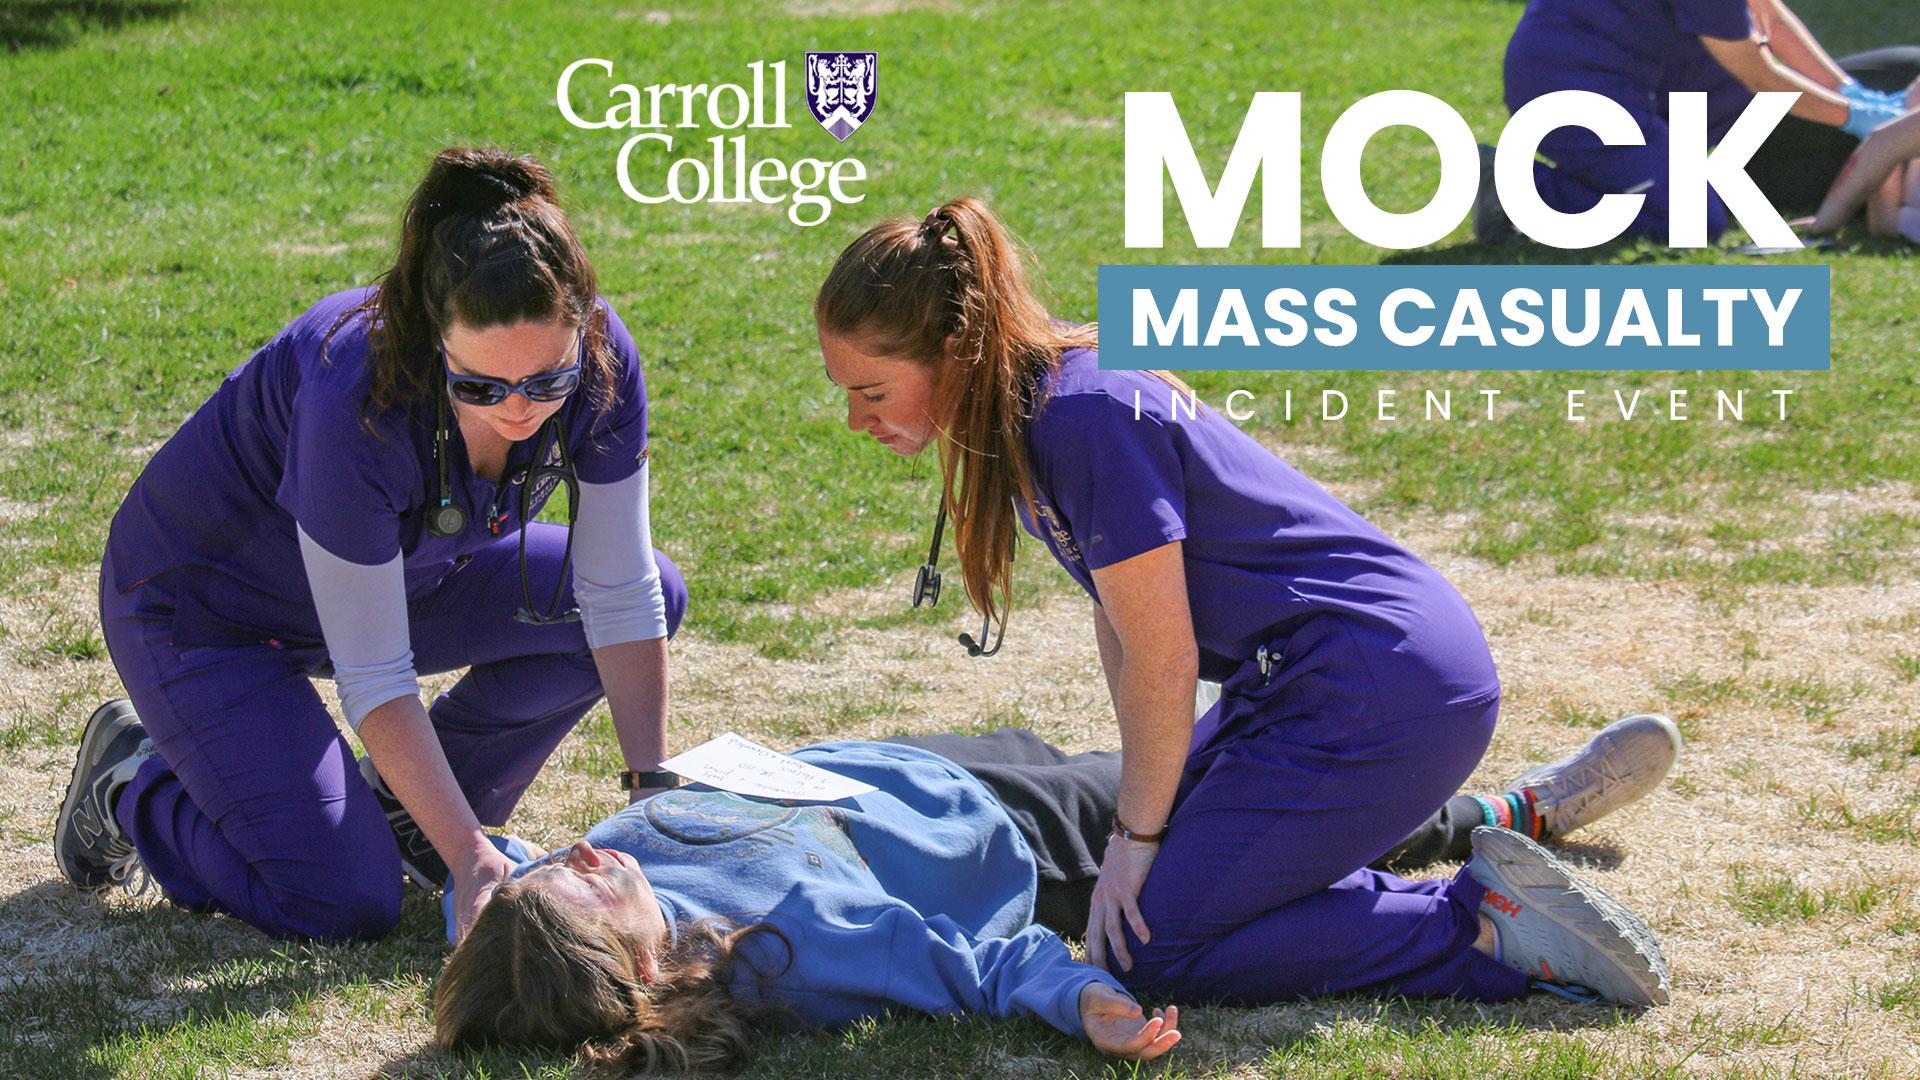 Mock Mass Casualty Event graphic